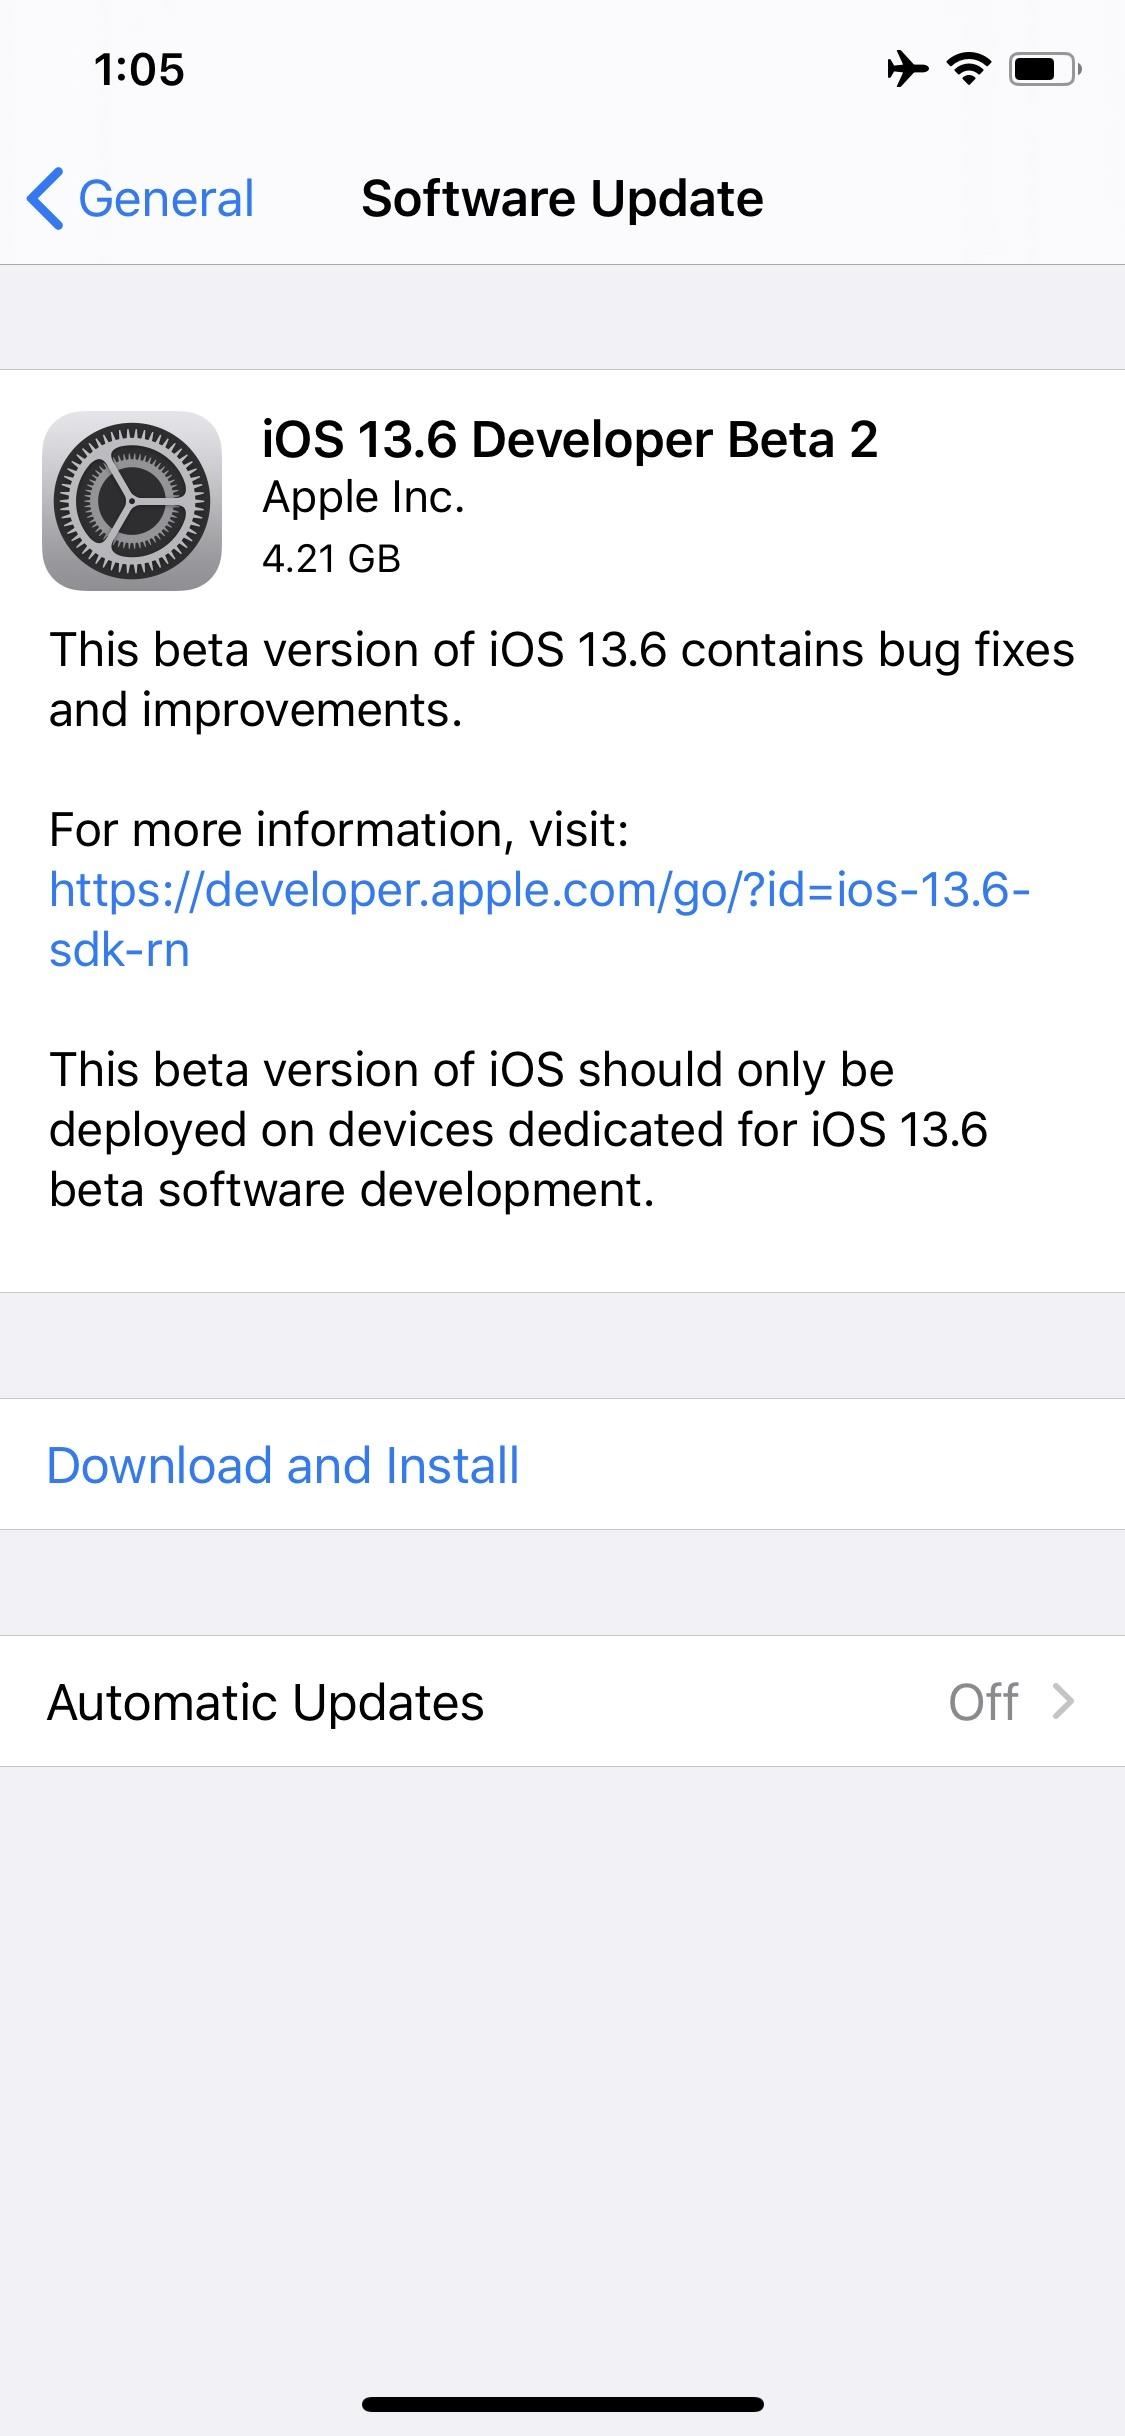 Apple's iOS 13.6 Developer Beta 2 for iPhone Includes Option to Automatically Download New Updates